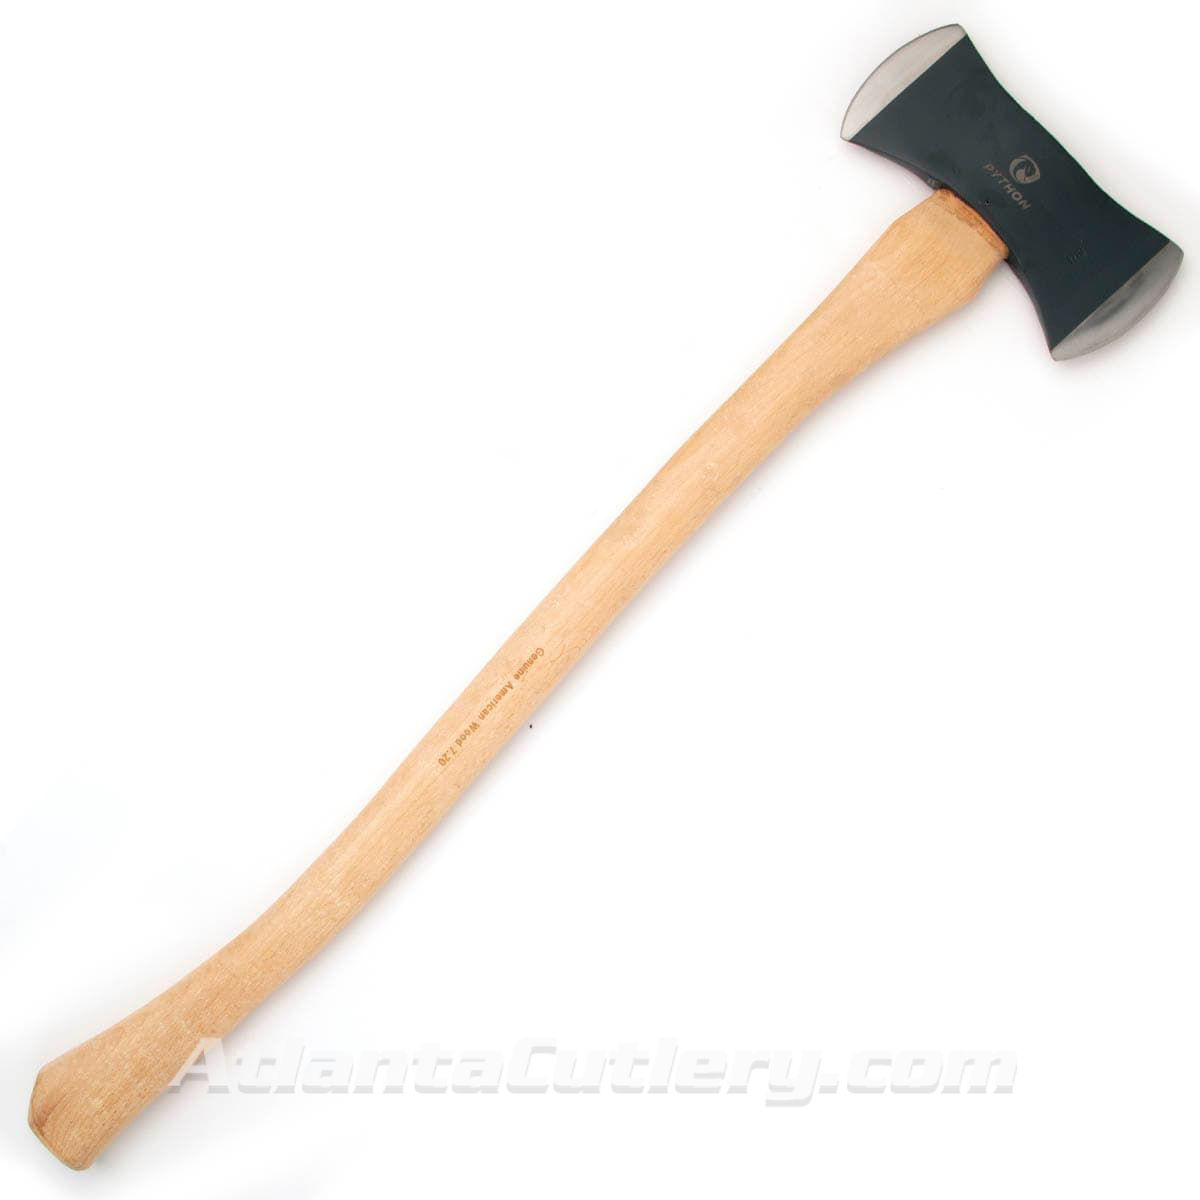 Python Double Bit Axe with Drop forged 1055 high carbon steel blade and hardwood handle, one side for cutting trees, the other is for splitting wood